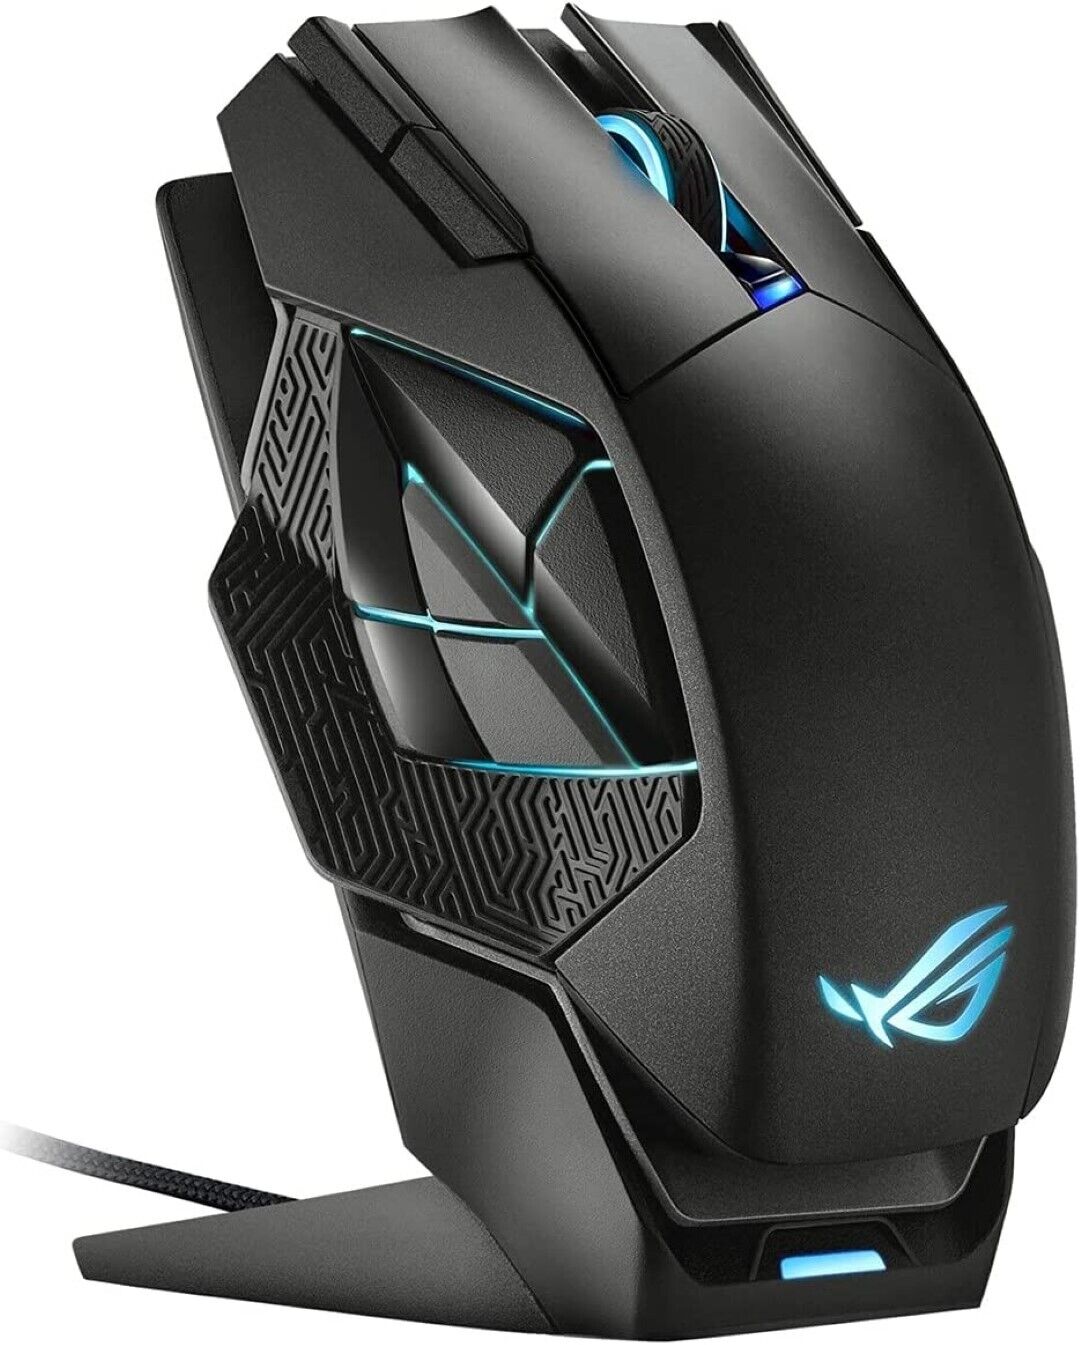 ASUSTek Gaming mouse wireless ROG Spatha X MMO 19,000dpi 12 buttons black